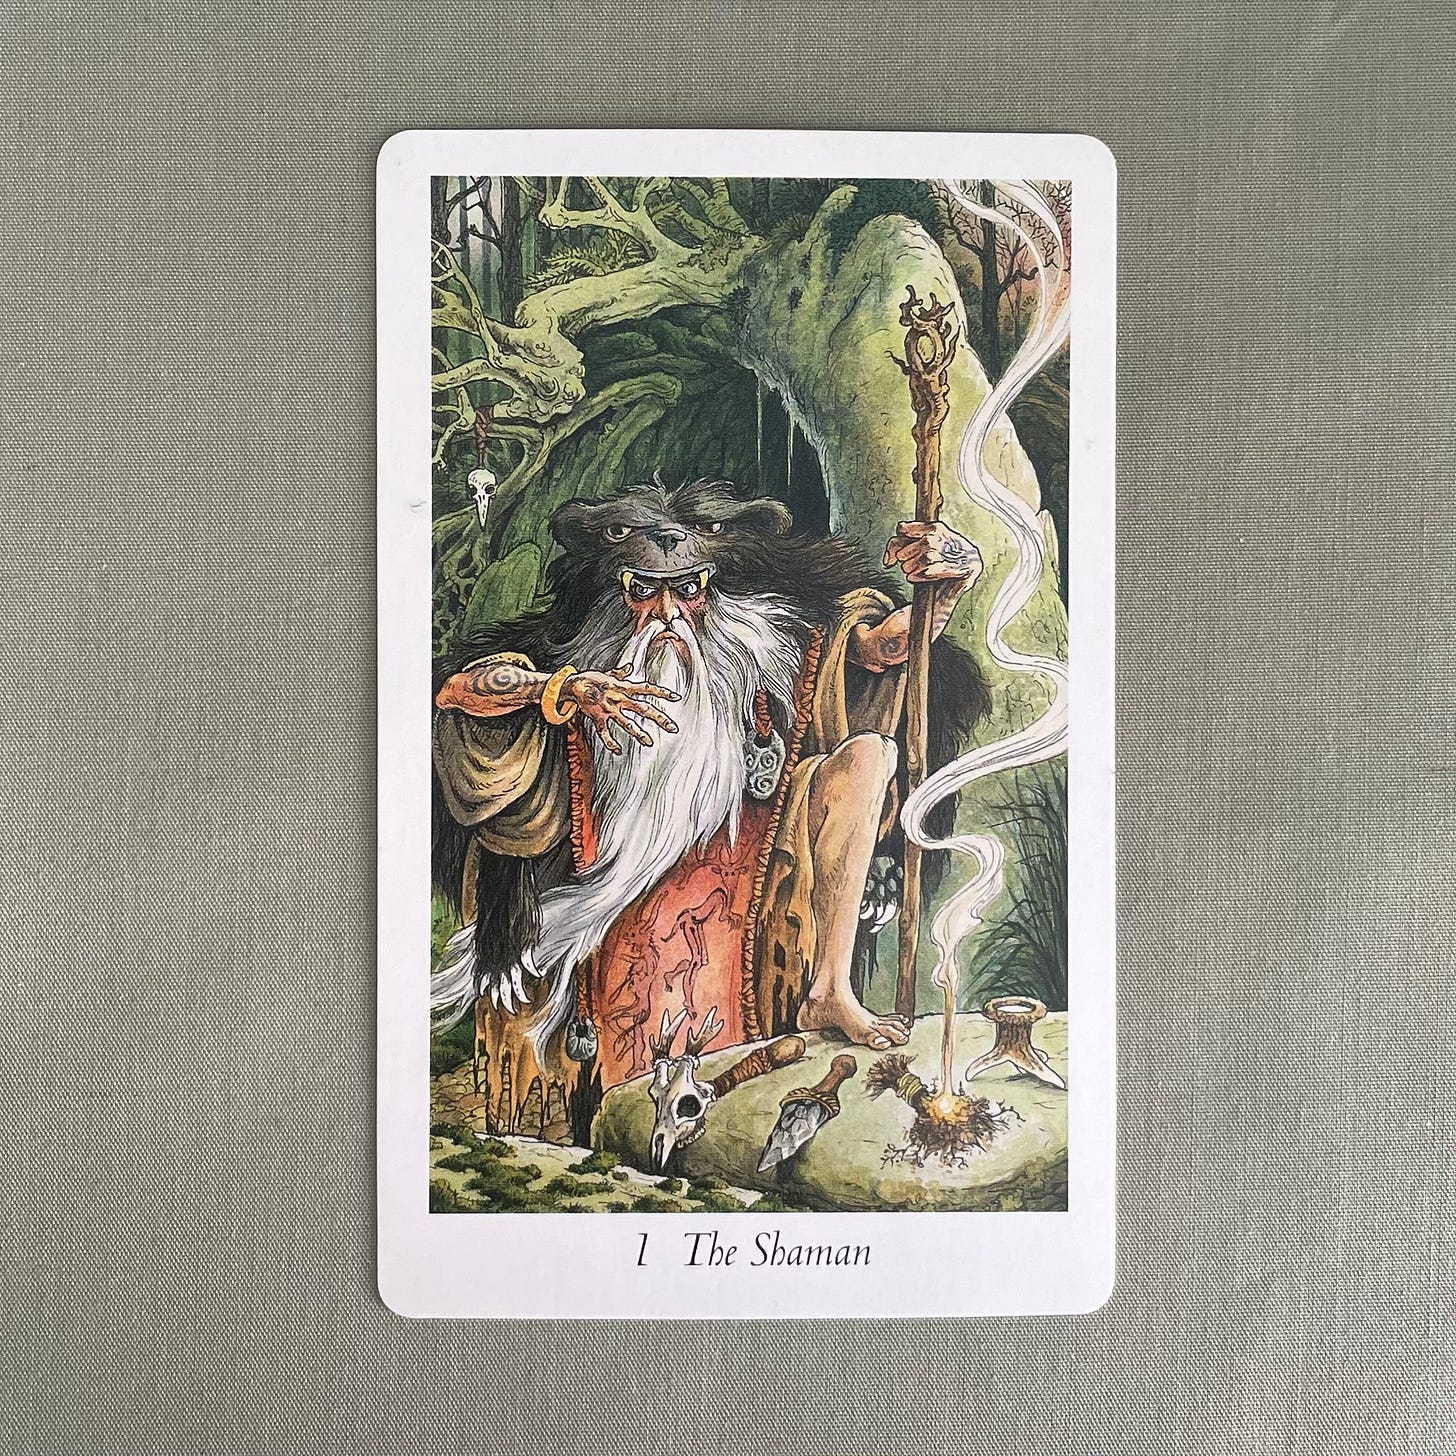 A hand drawn tarot card sits on a sage green cloth. The card depicts a wildly bearded old man dressed in a bear cloak (the bear’s head forming the hood) and various other animal skins. His arms are tattooed with spirals and he wears a gold torc on his right wrist. In his left hand is a gnarled wooden staff and in front of him, on a stone table, are various items for performing magic with the elements, a roebuck skull rattle for air, a flint knife for earth, a lit bundle of herbs for fire and a hollow antler-tine cup for water. Behind him are the ancient twisted trees of the wild wood, and it appears to be either dawn or dusk from the reddish tint to the small amount of sky visible at the top right of the card.